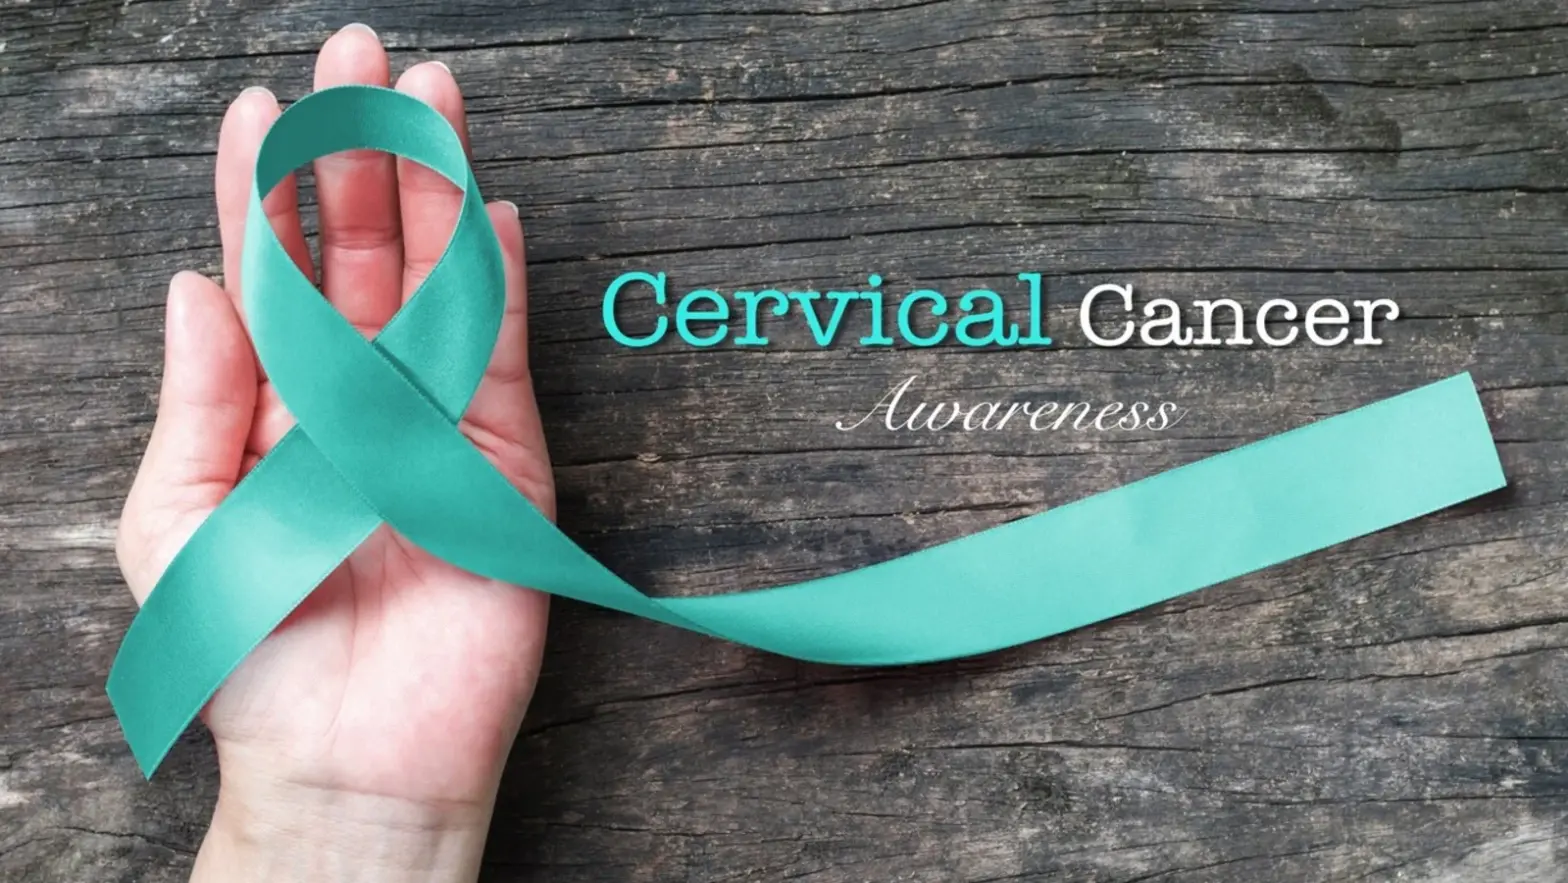 Expert on 'Cervical Cancer awareness month' emphasize importance of early diagnosis, annual screening